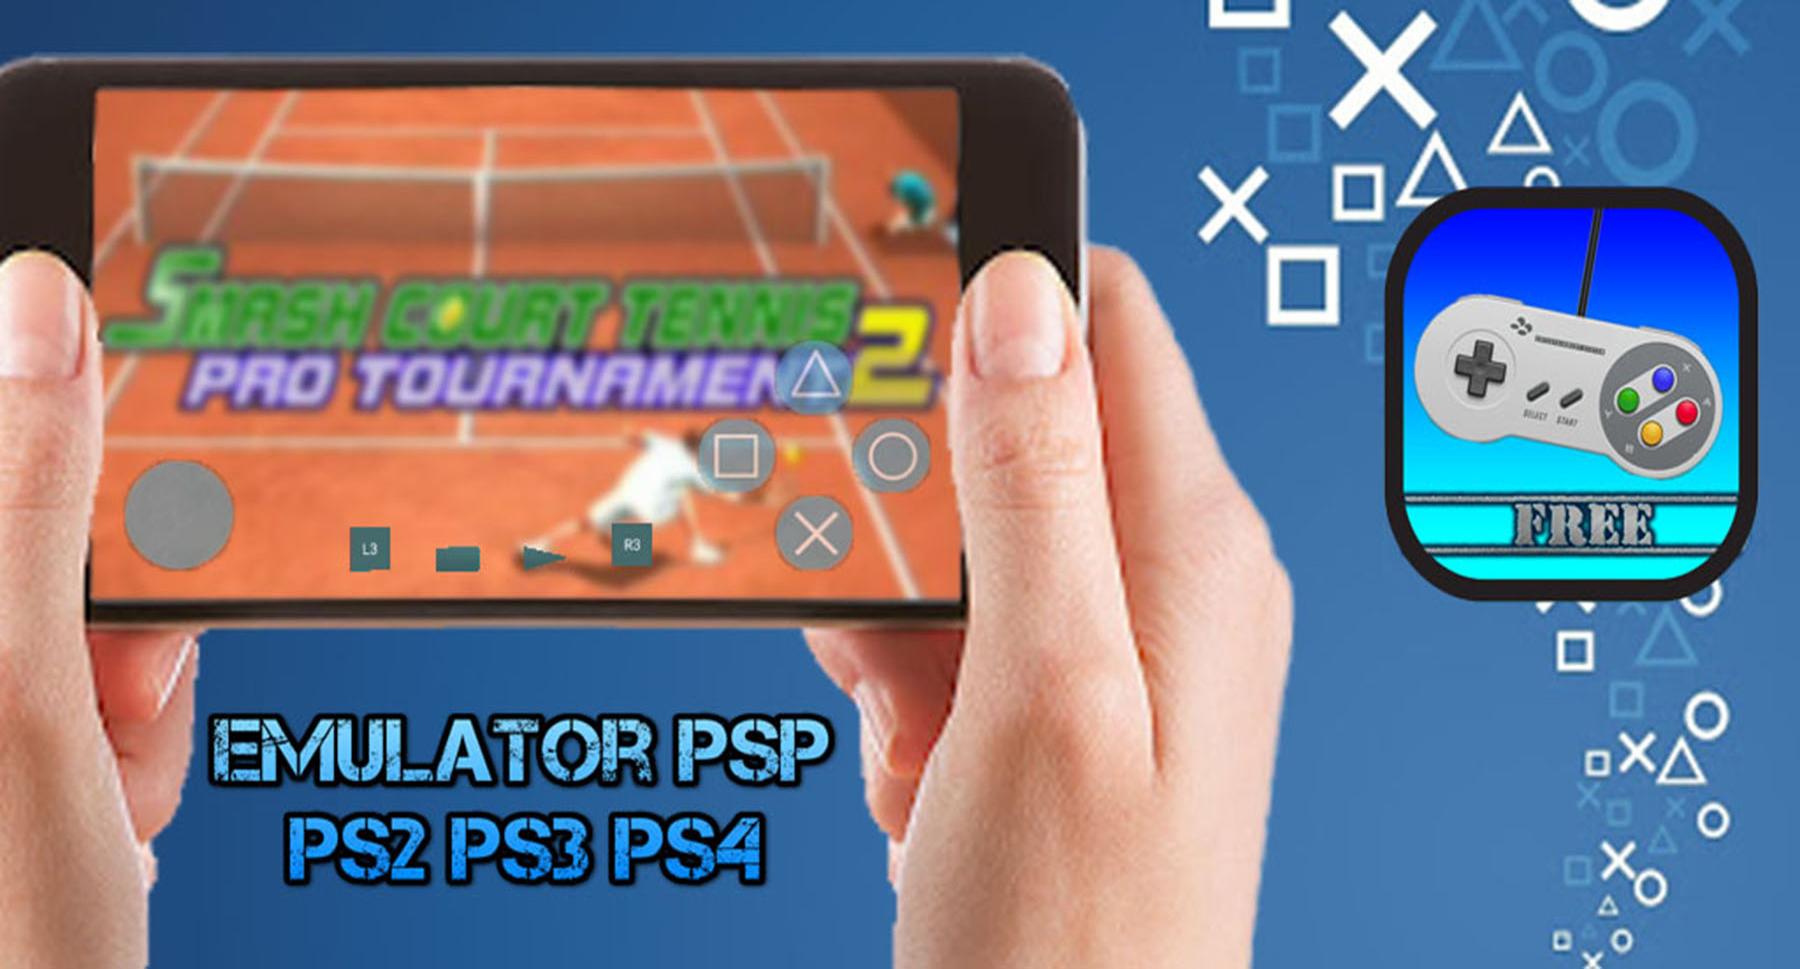 Download Play Emulator Psp Ps2 Ps3 Ps4 Free For Android Apk Download - install roblox ps3